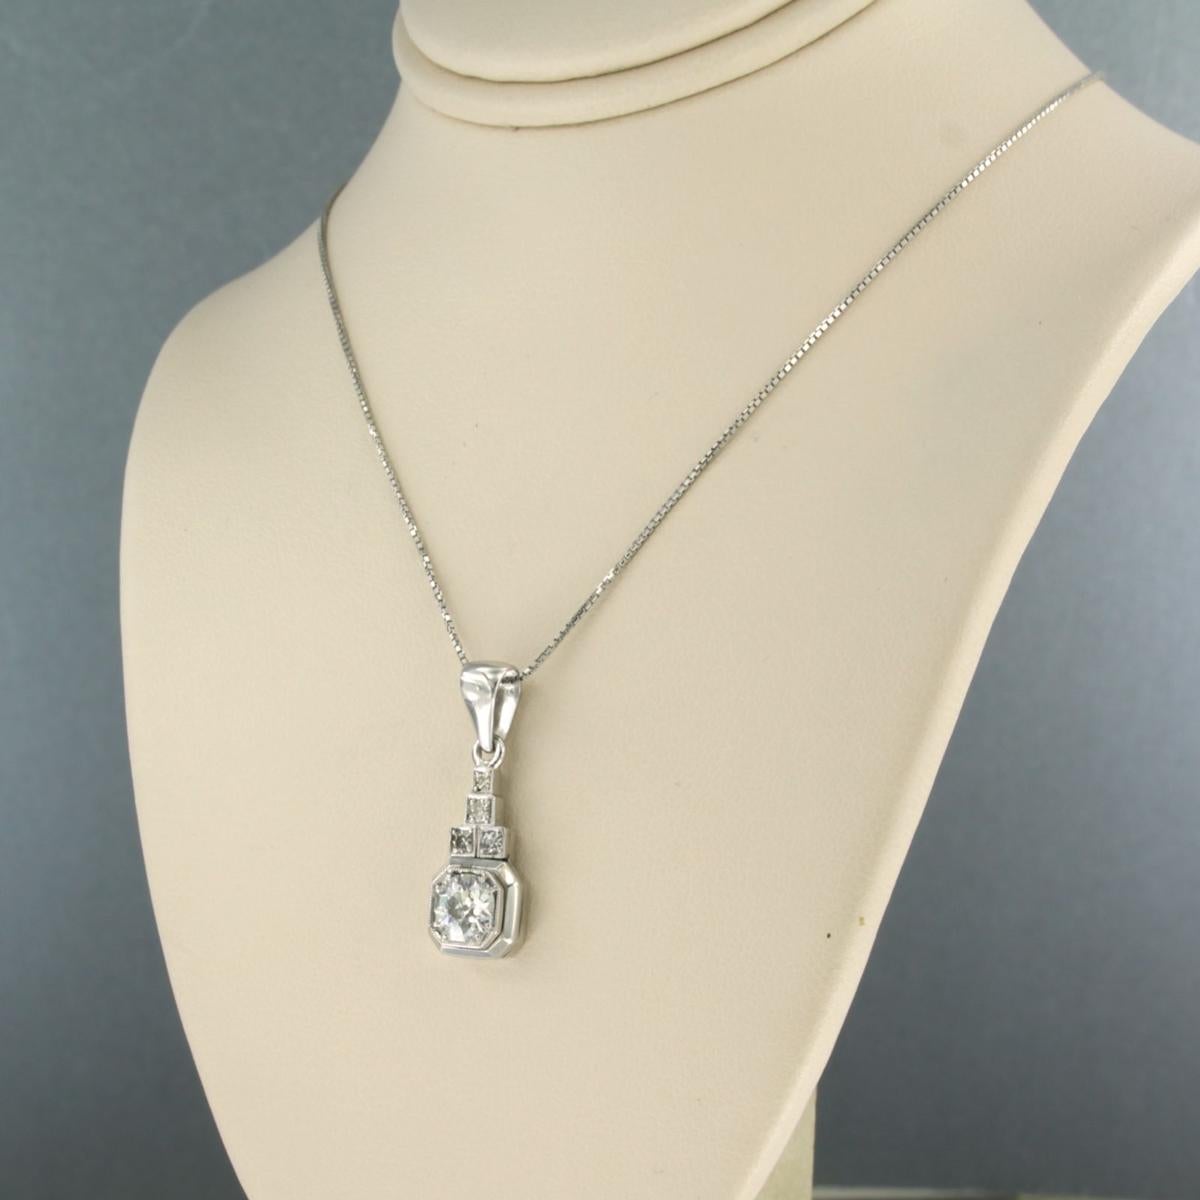 Necklace and ART DECO pendant set with diamonds 18k white gold In Good Condition For Sale In The Hague, ZH